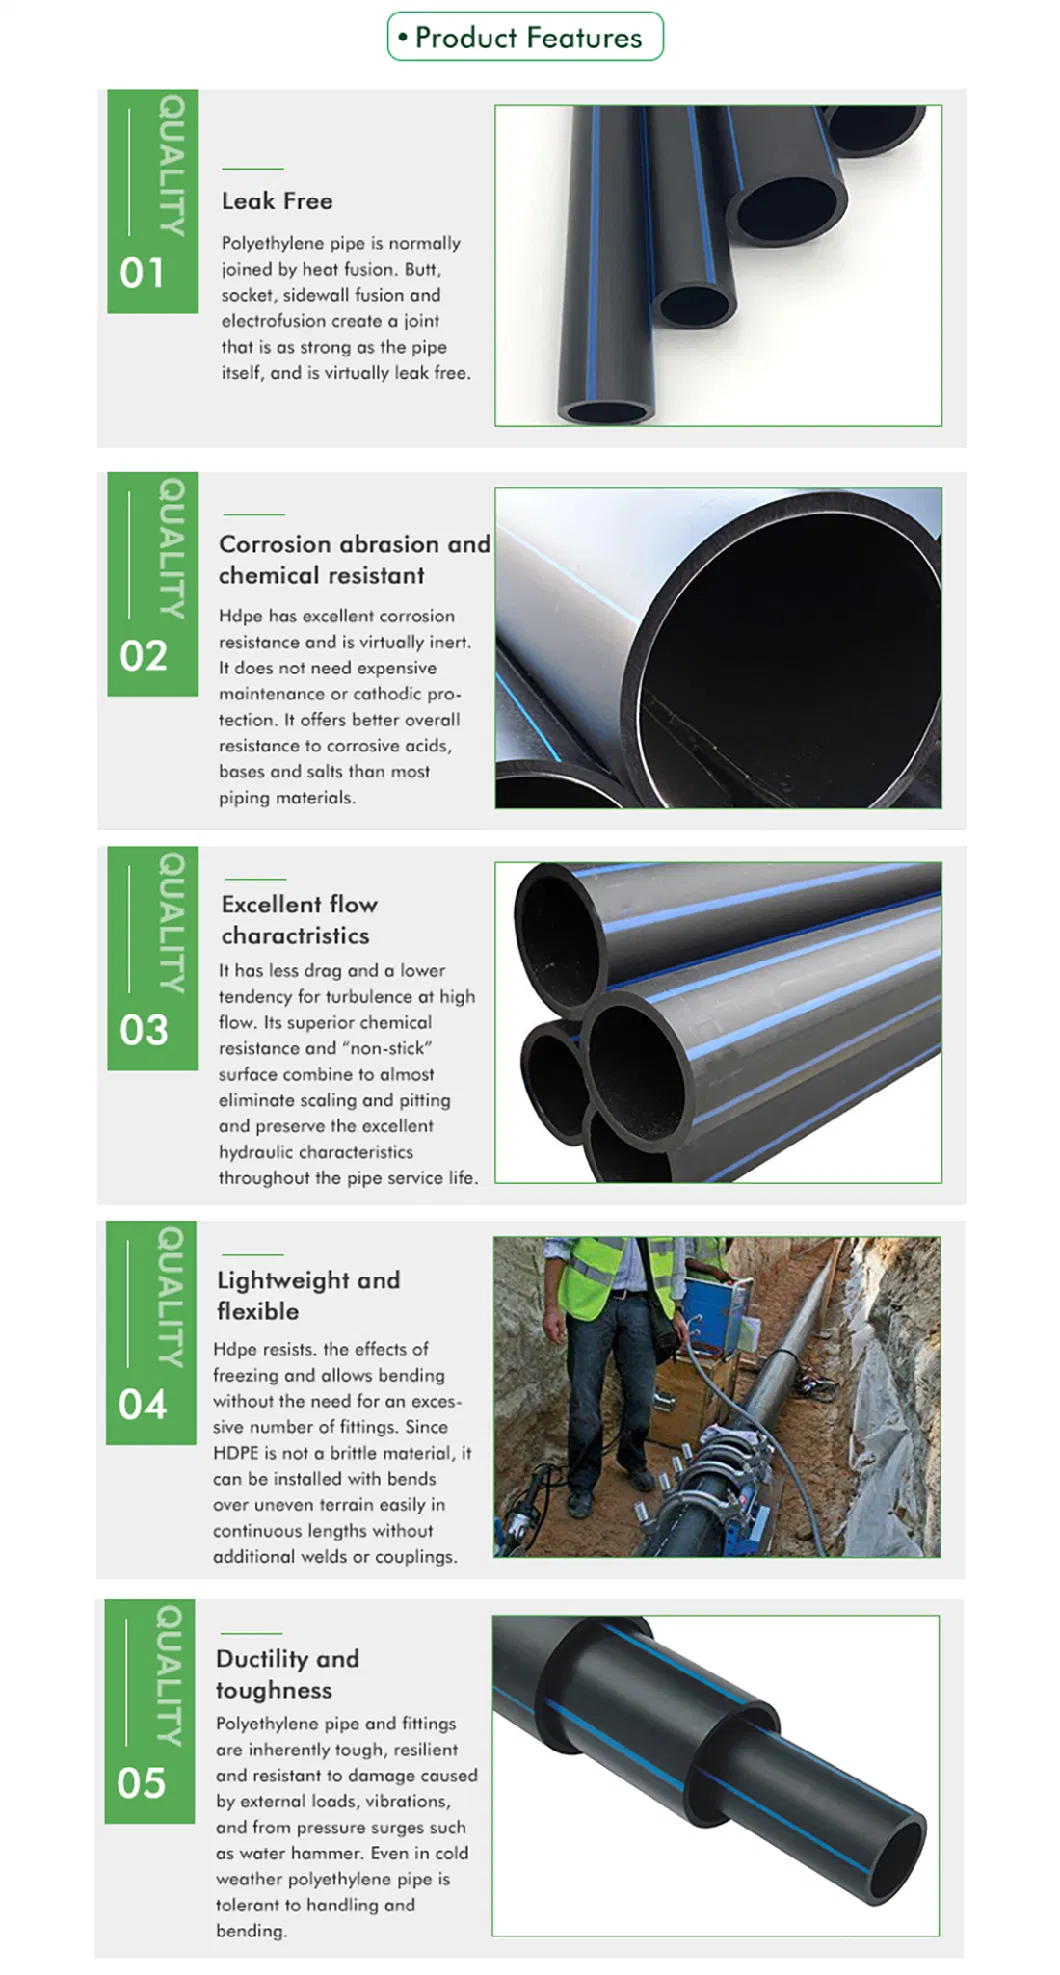 HDPE Pipe with Two HDPE Flange Adapter and Two Steel Flanges